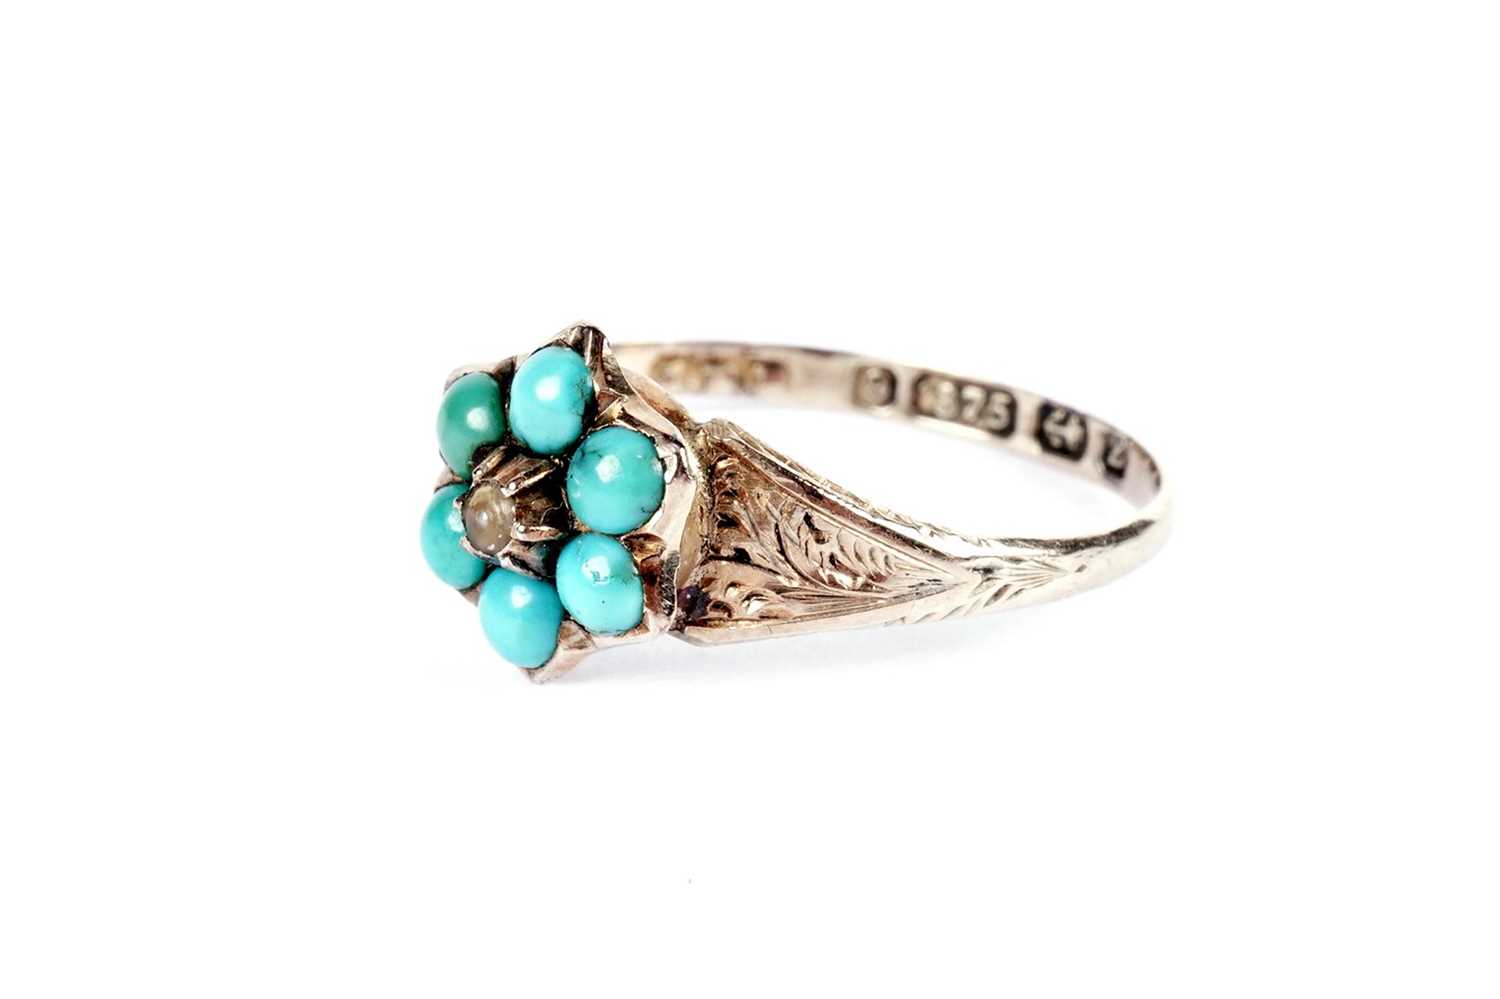 A Victorian Romantic Period turquoise and seed pearl flowerhead ring